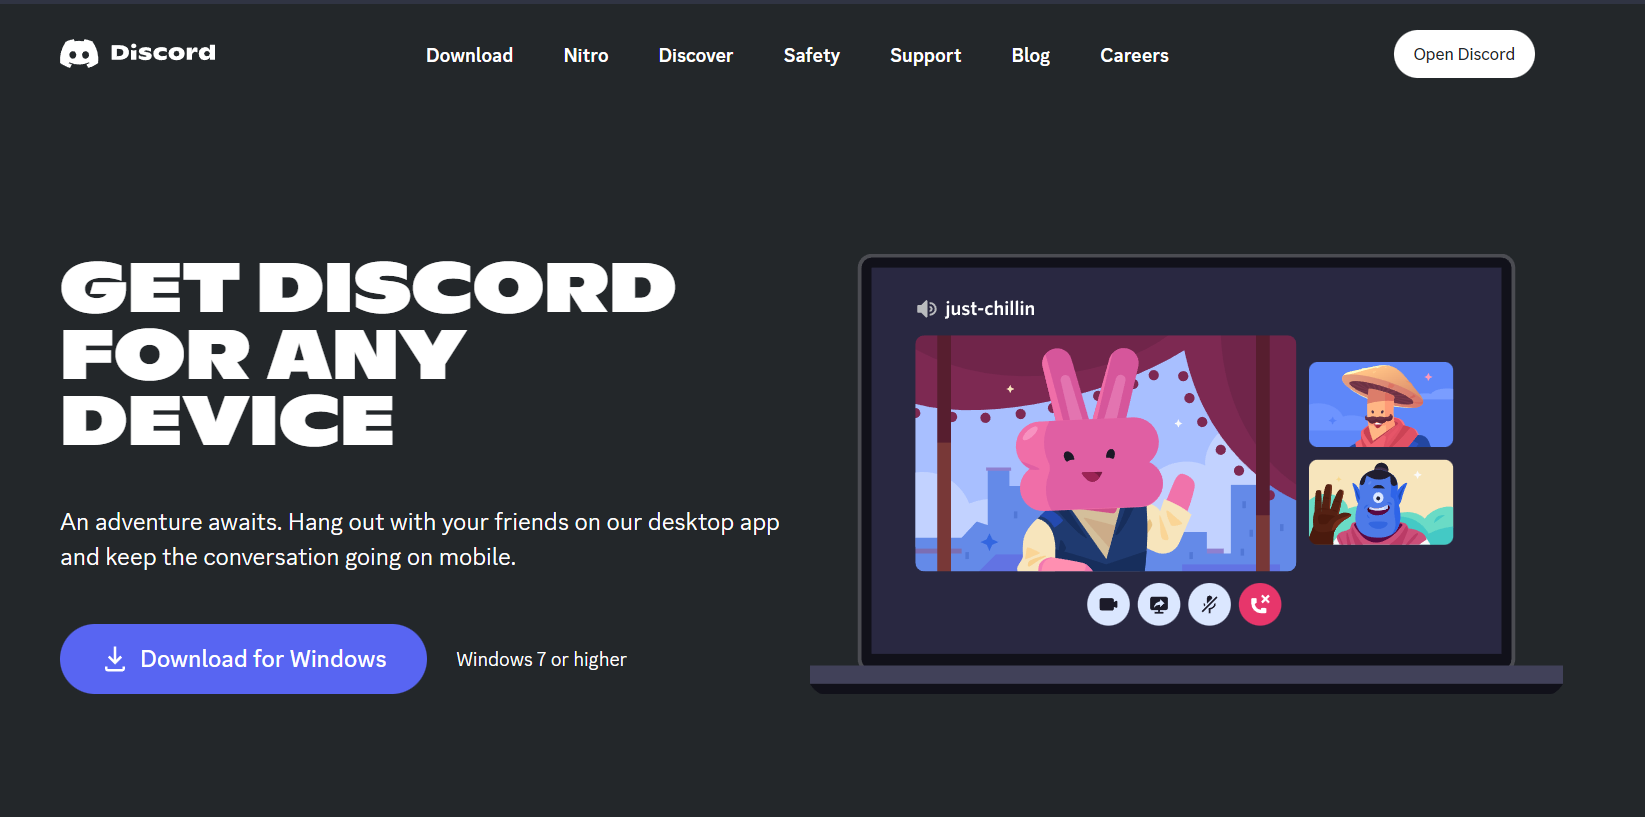 Download the latest version of Discord